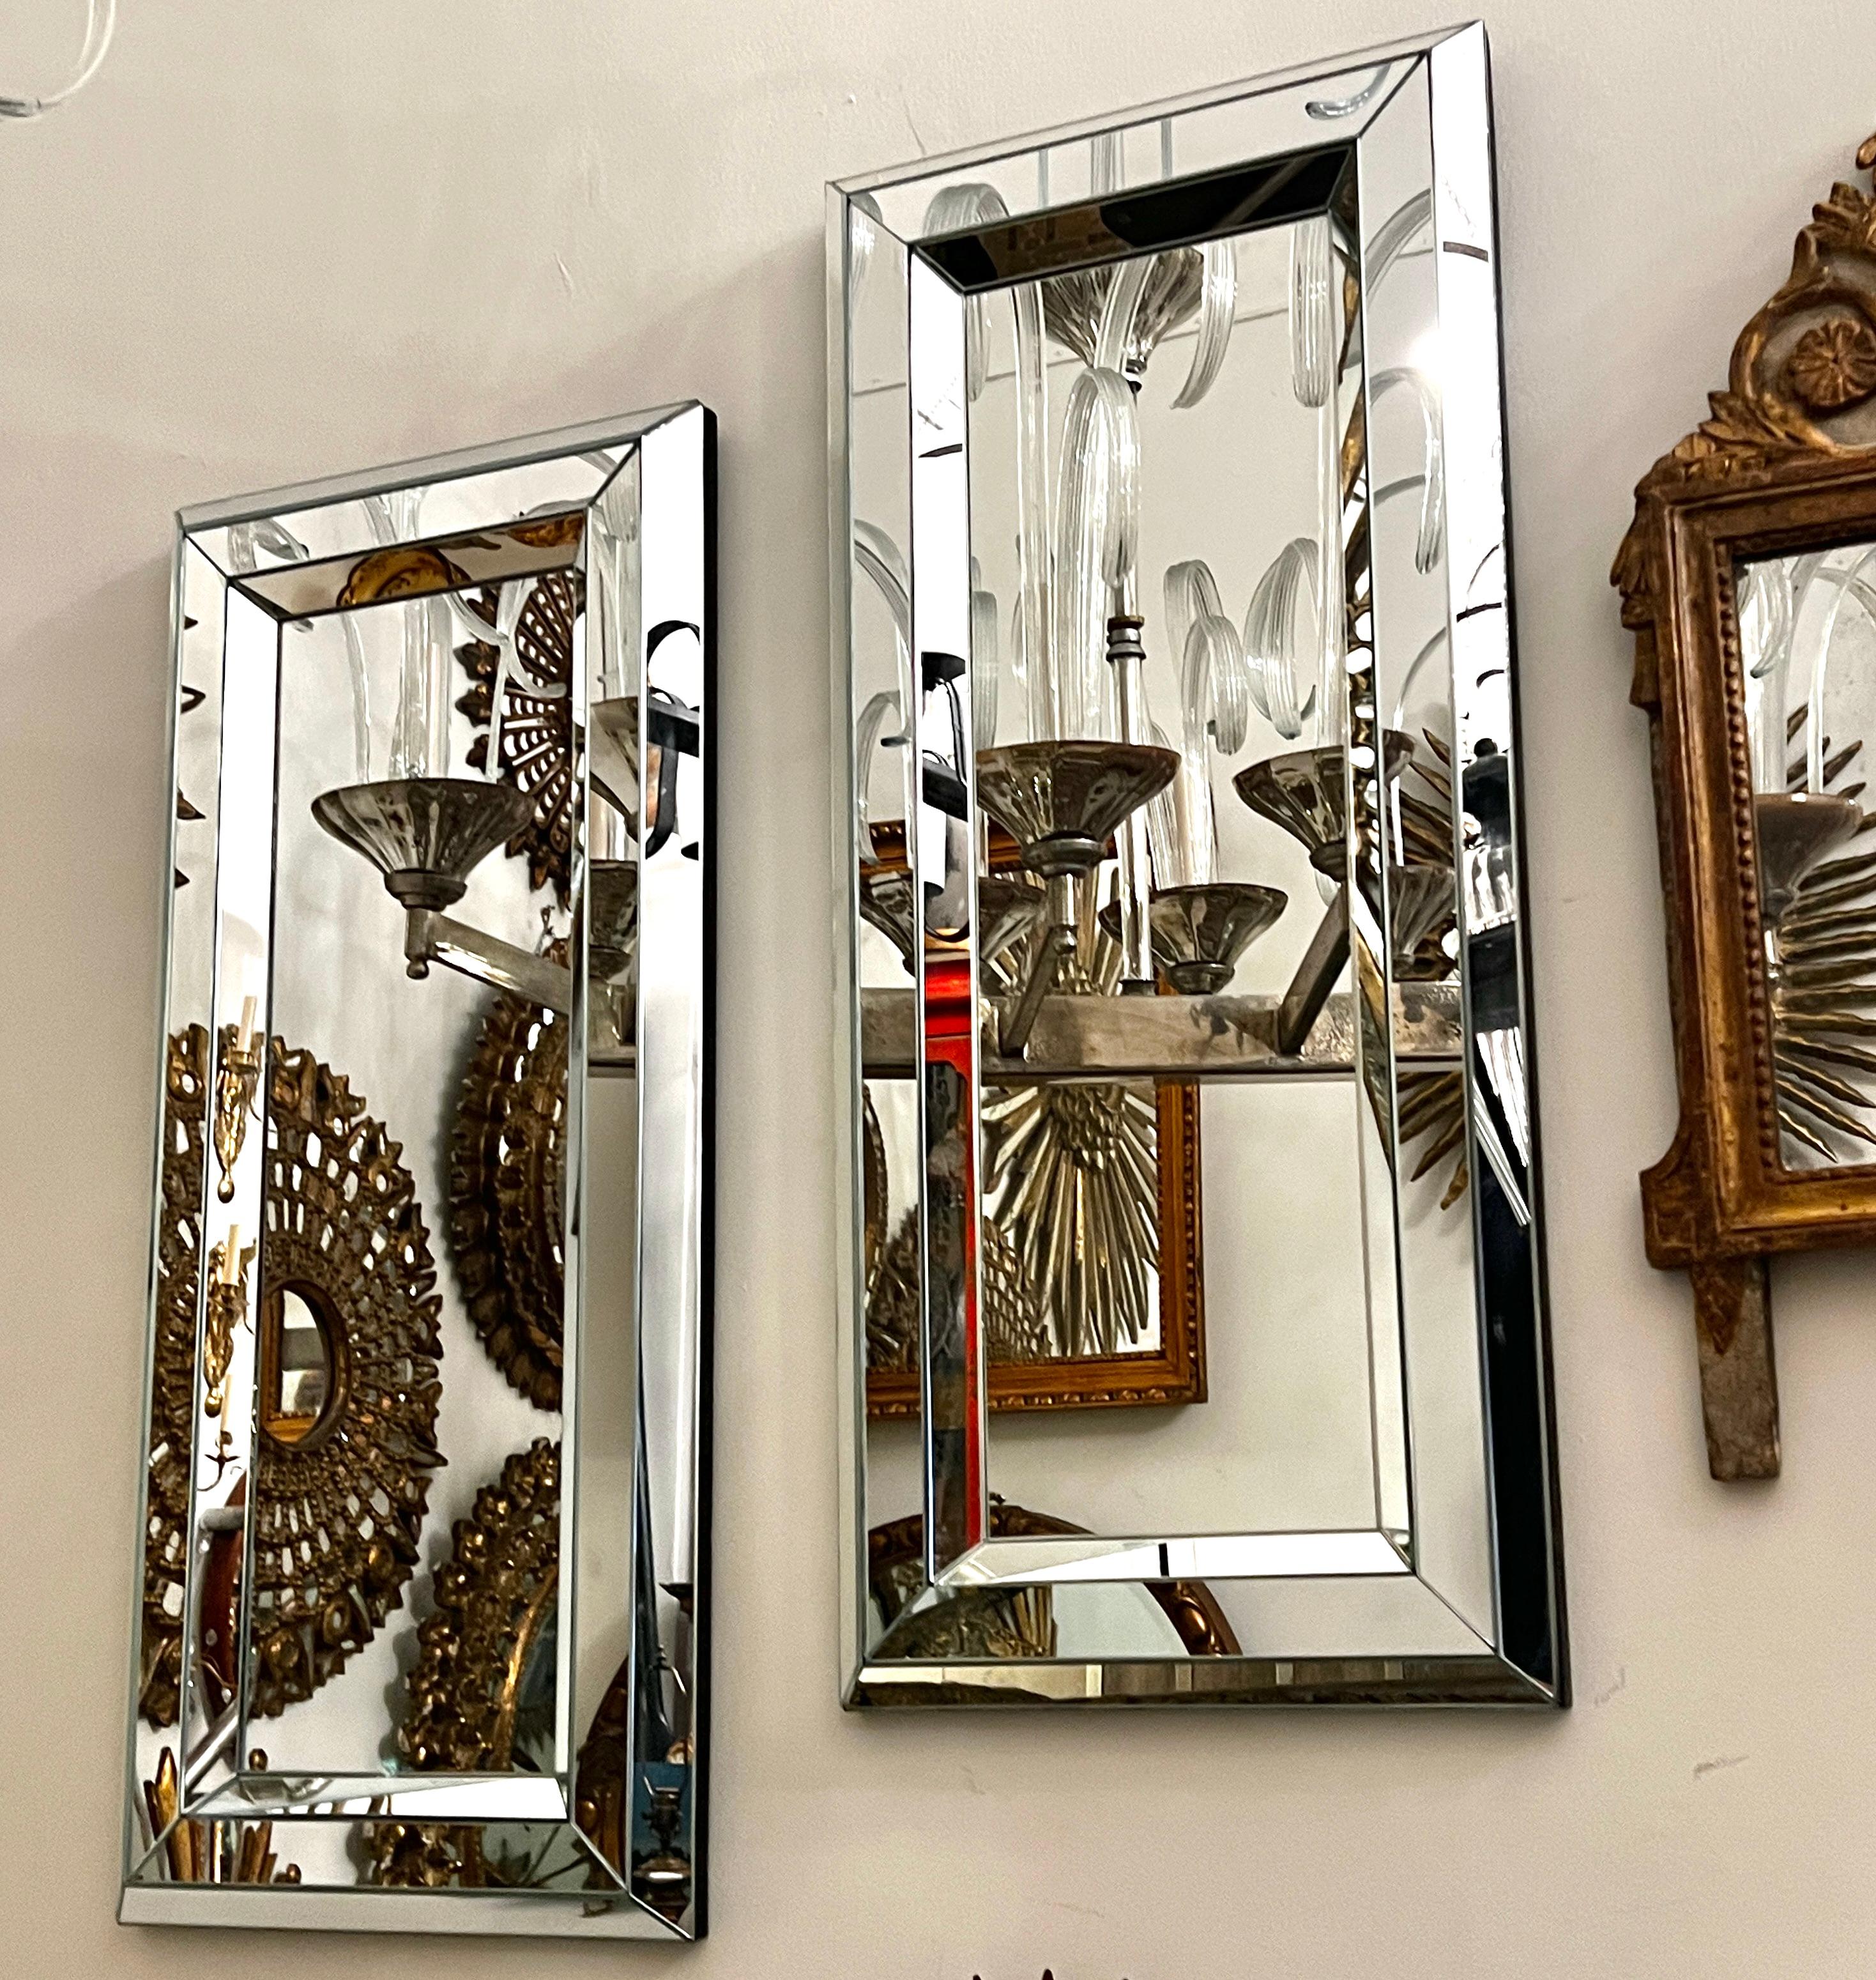 Pair of circa 1970's French mirrors with geometric frame.

Measurements:
Height: 36